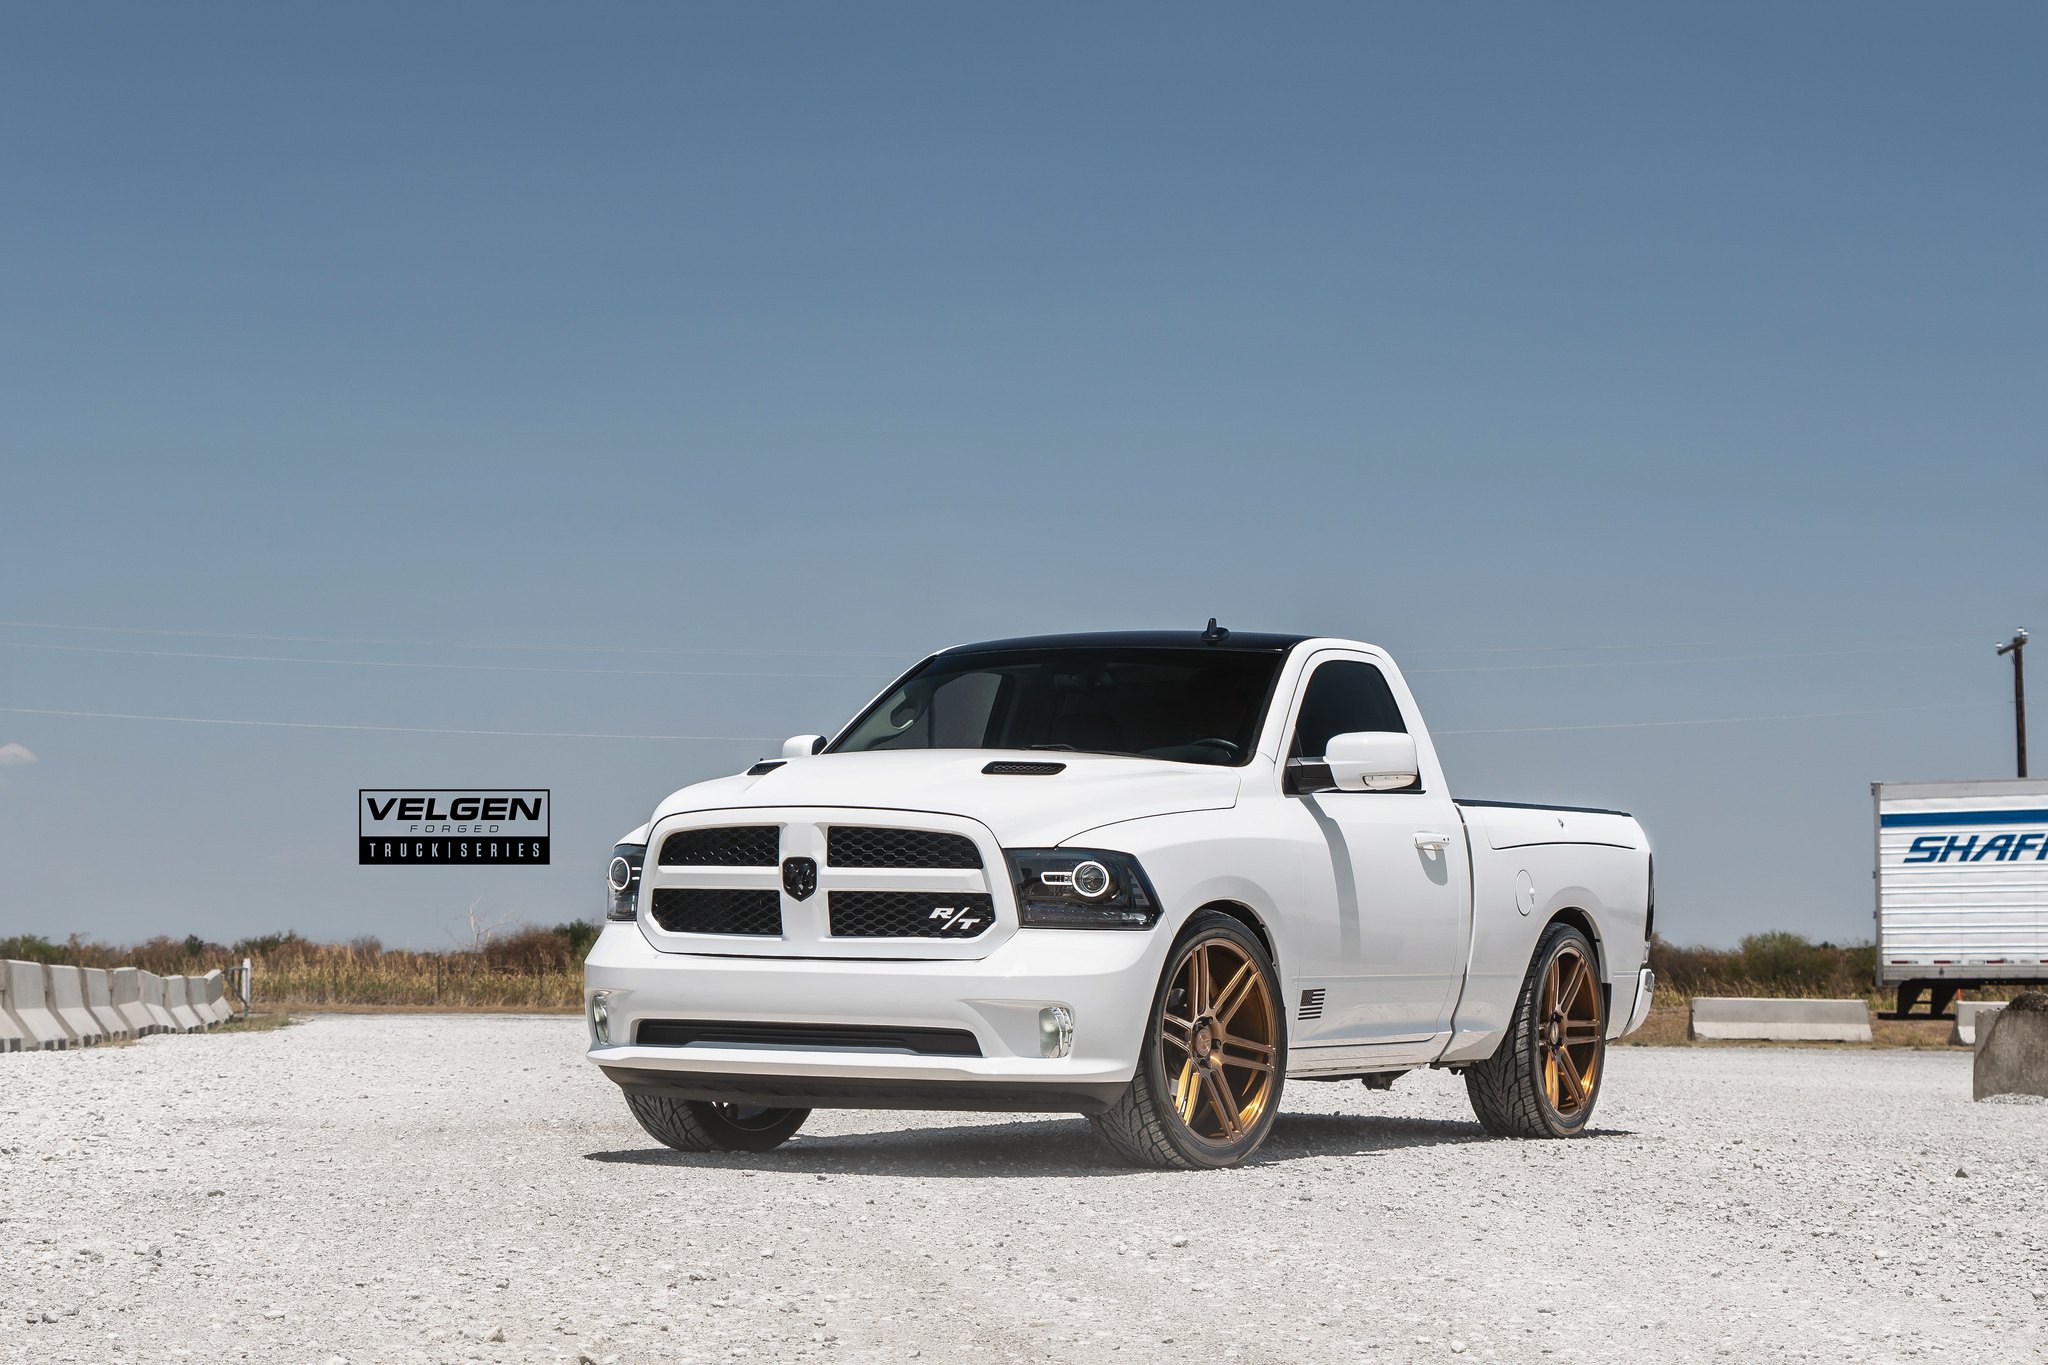 Blacked Out Mesh Grille on White Dodge Ram - Photo by Velgen